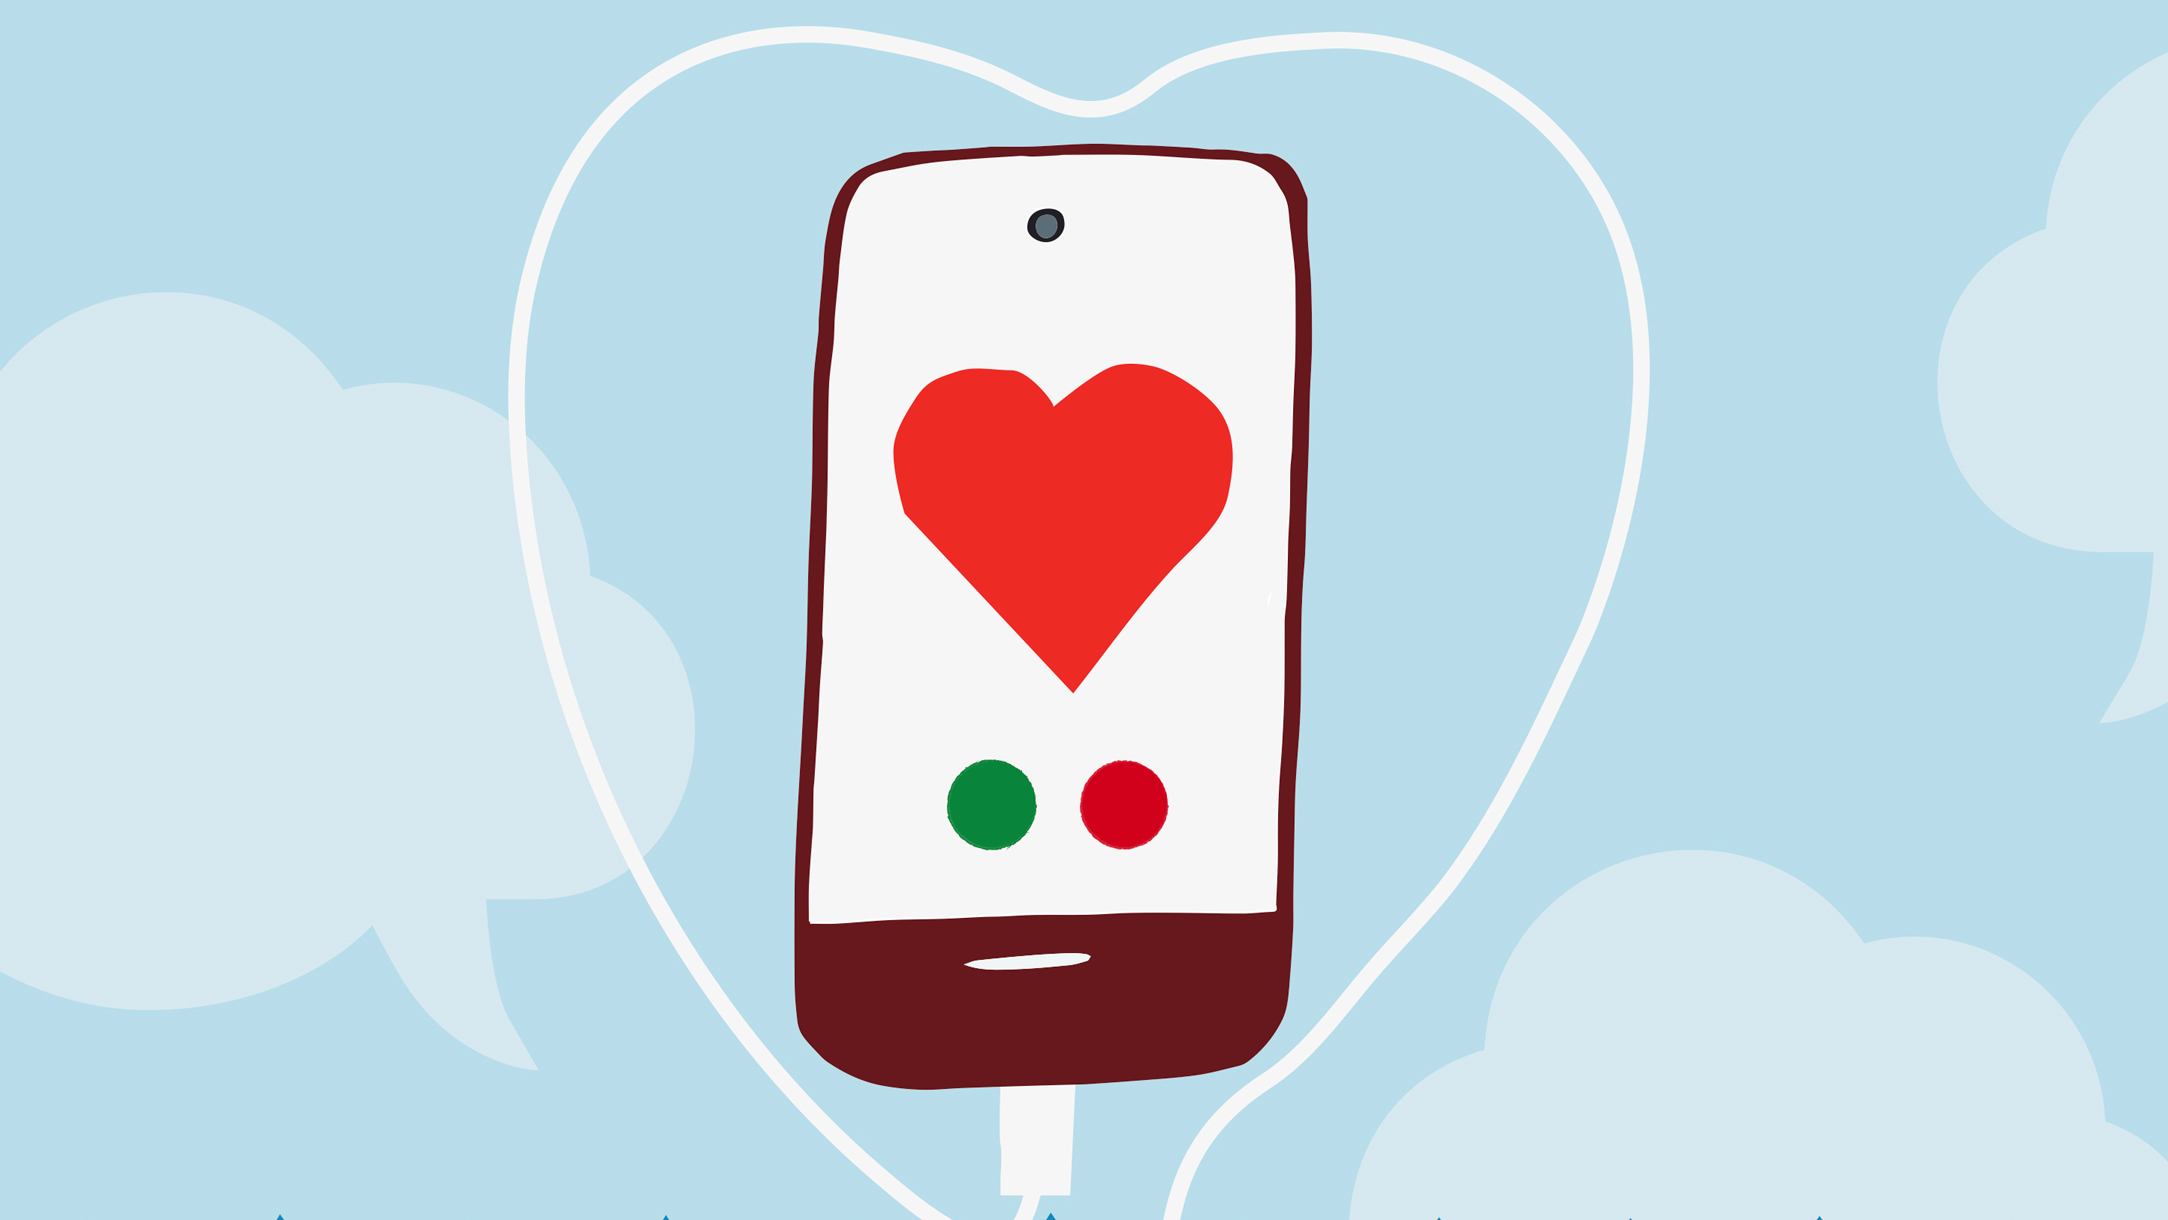 Illustration of mobile phone inside heart and with a heart displayed on the phone screen